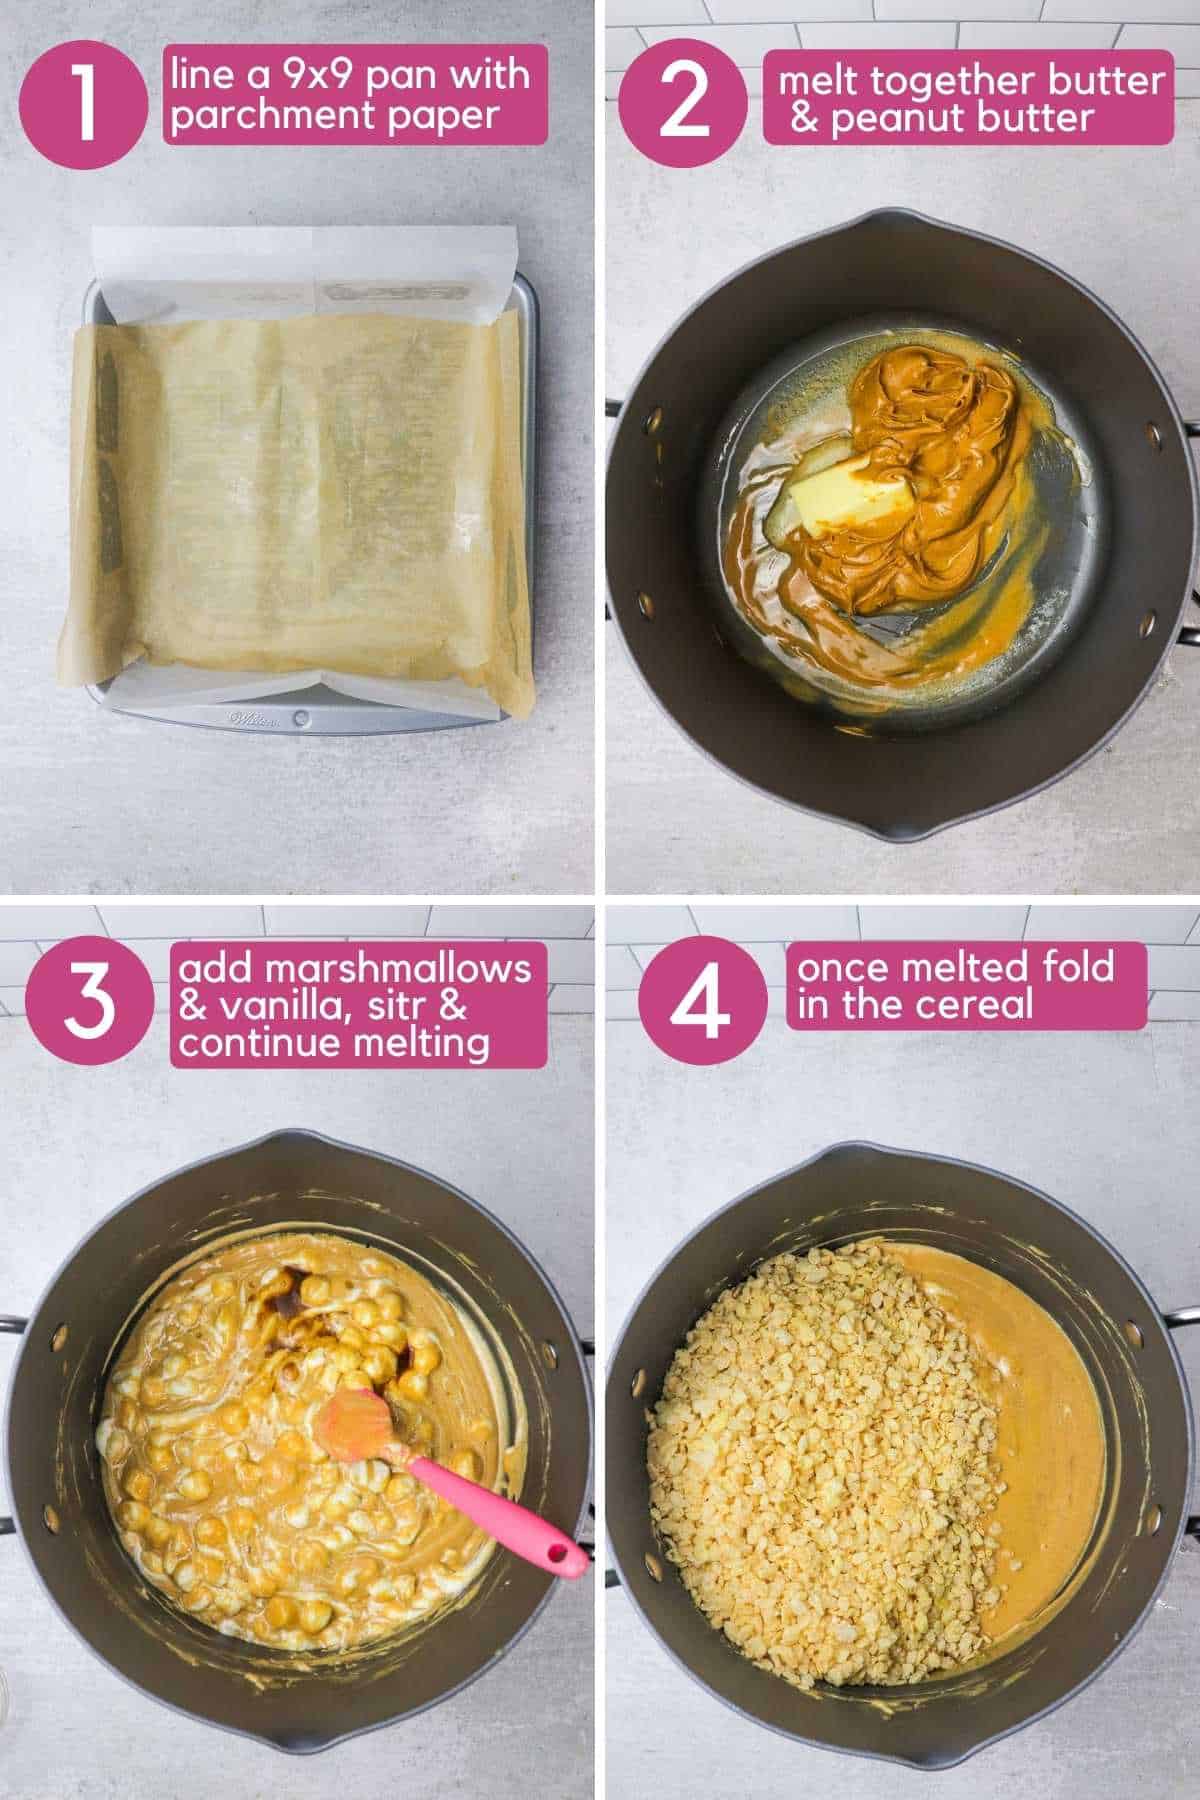 Images showing how to line a baking pan, and melt together butter, peanut butter, and marshmallows.